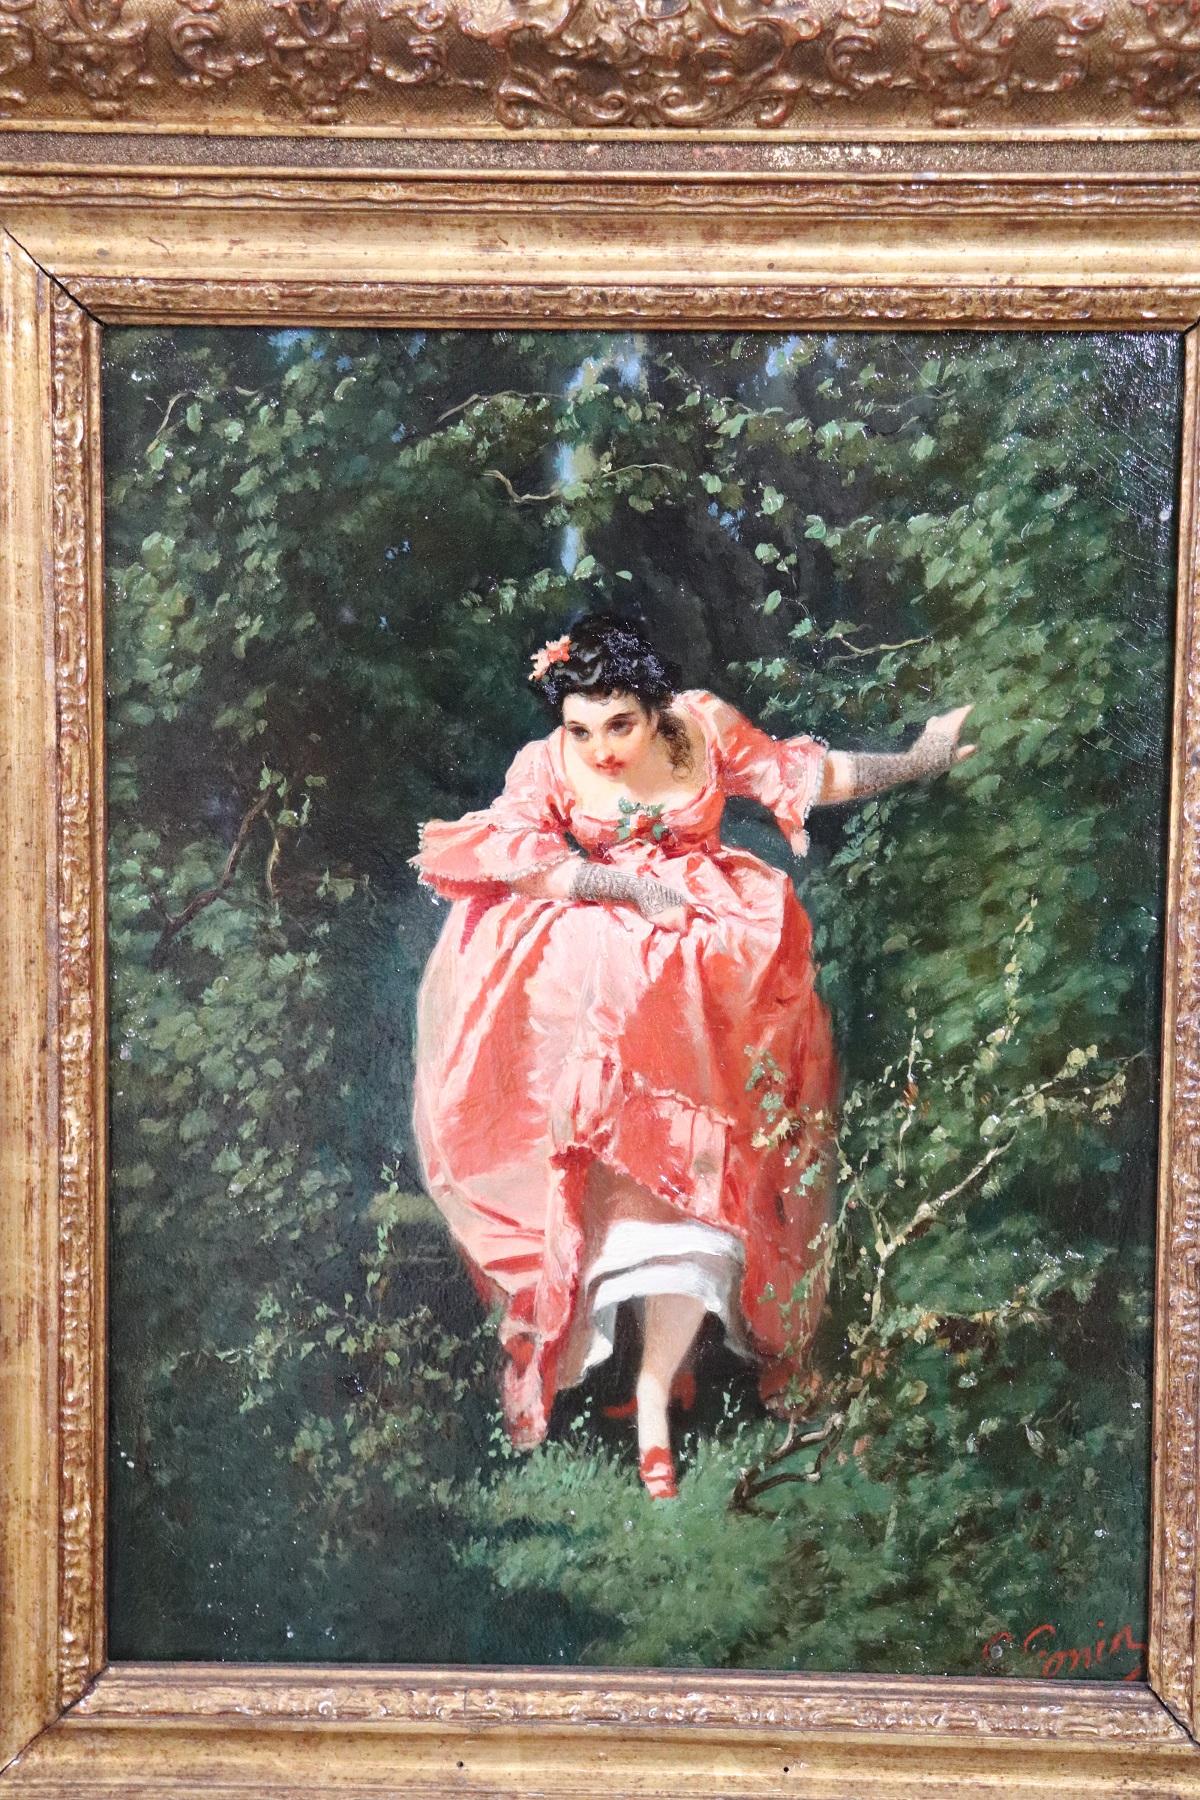 Important refined oil painting on cardboard from a collection of nineteenth century works. Painting by G. Gonin, a very important artist who entered the history of art among the great Piedmontese painters of the 19th century.

Biographical